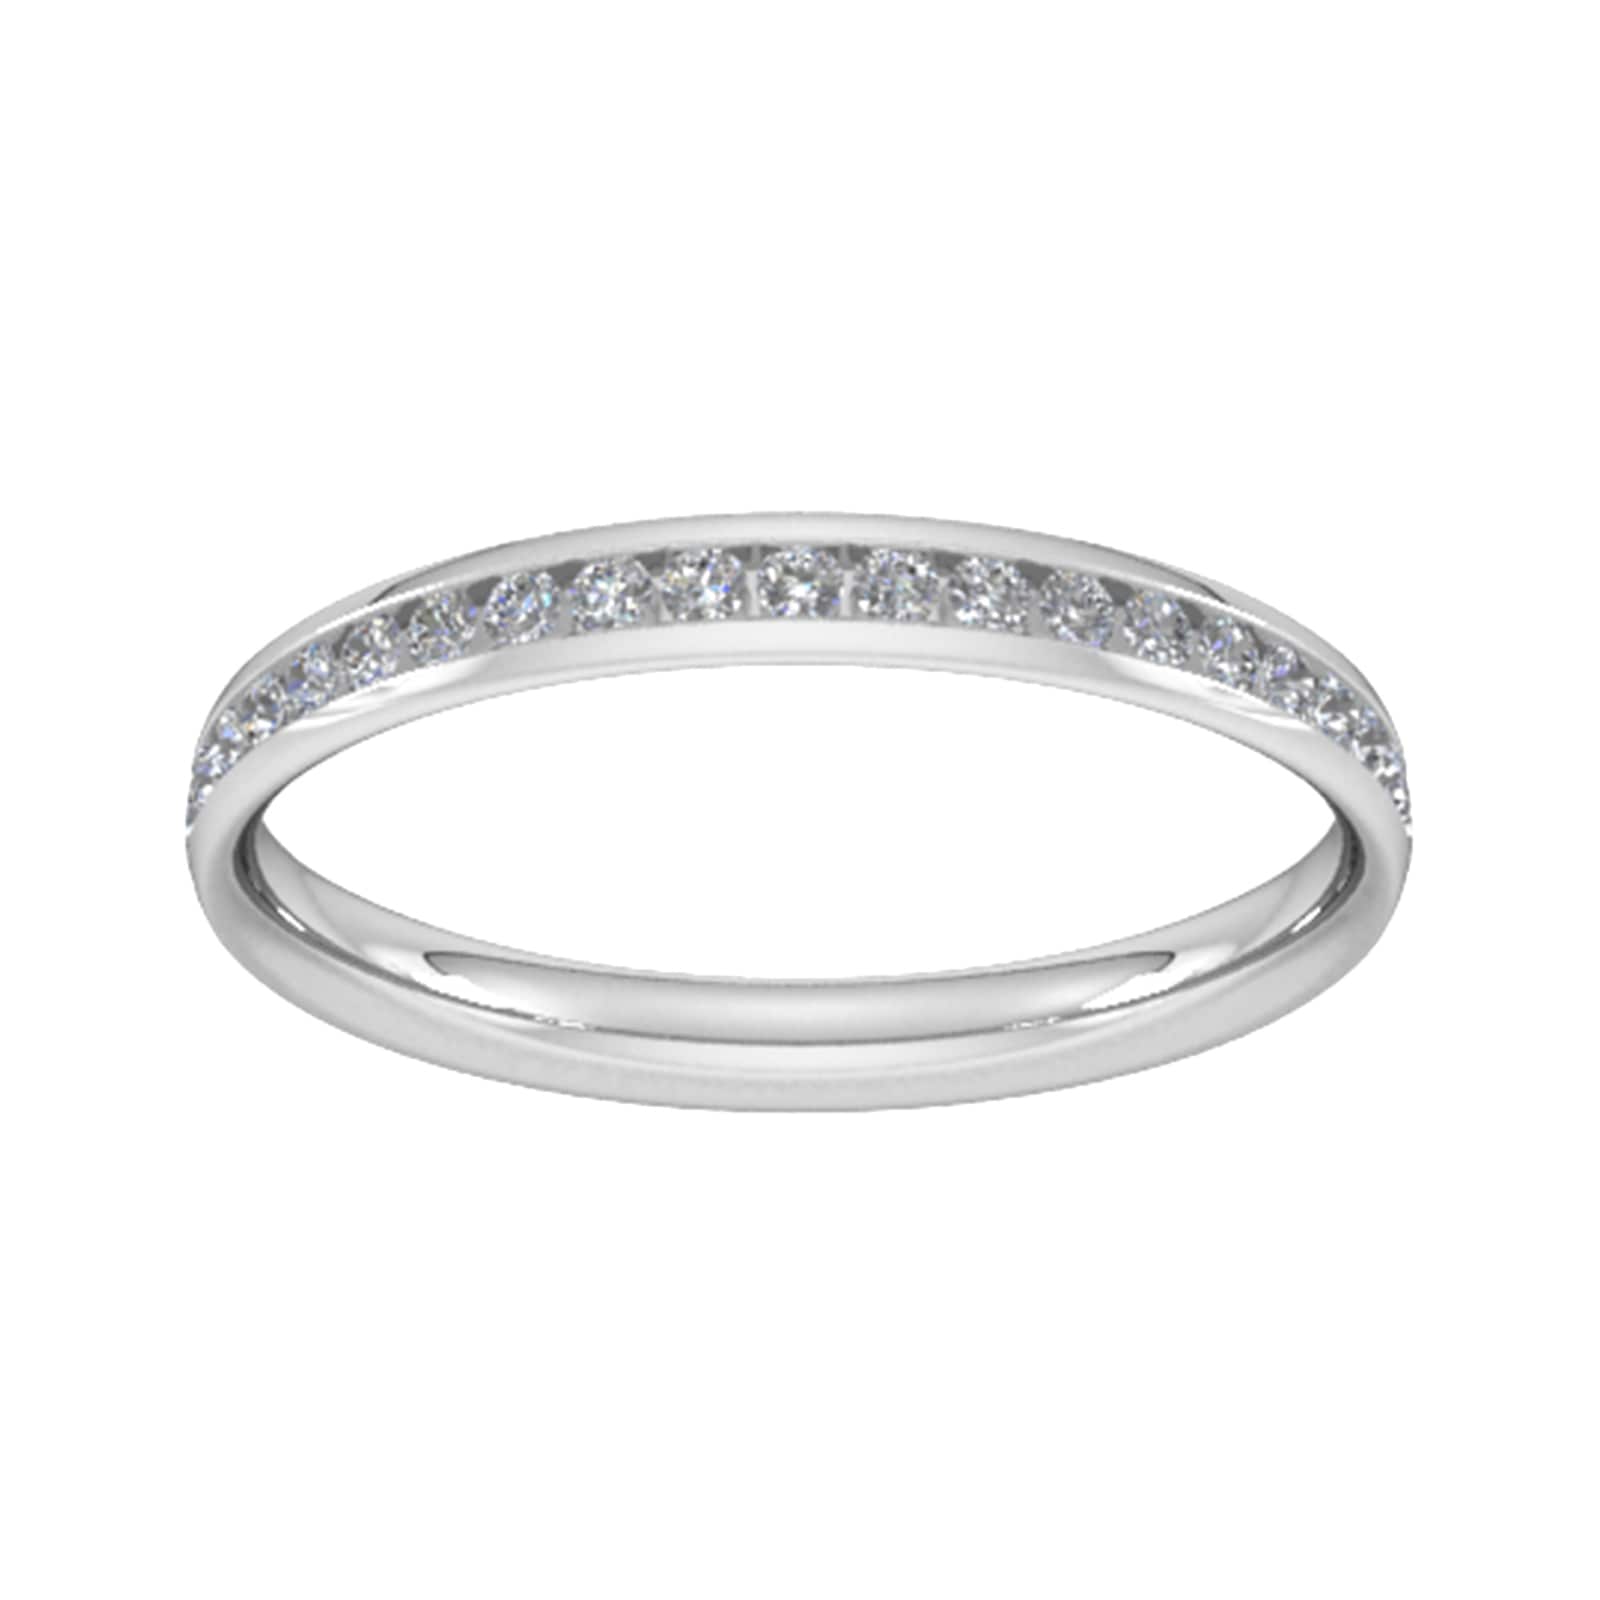 0.21 Carat Total Weight Half Channel Set Brilliant Cut Diamond Wedding Ring In 9 Carat White Gold - Ring Size S